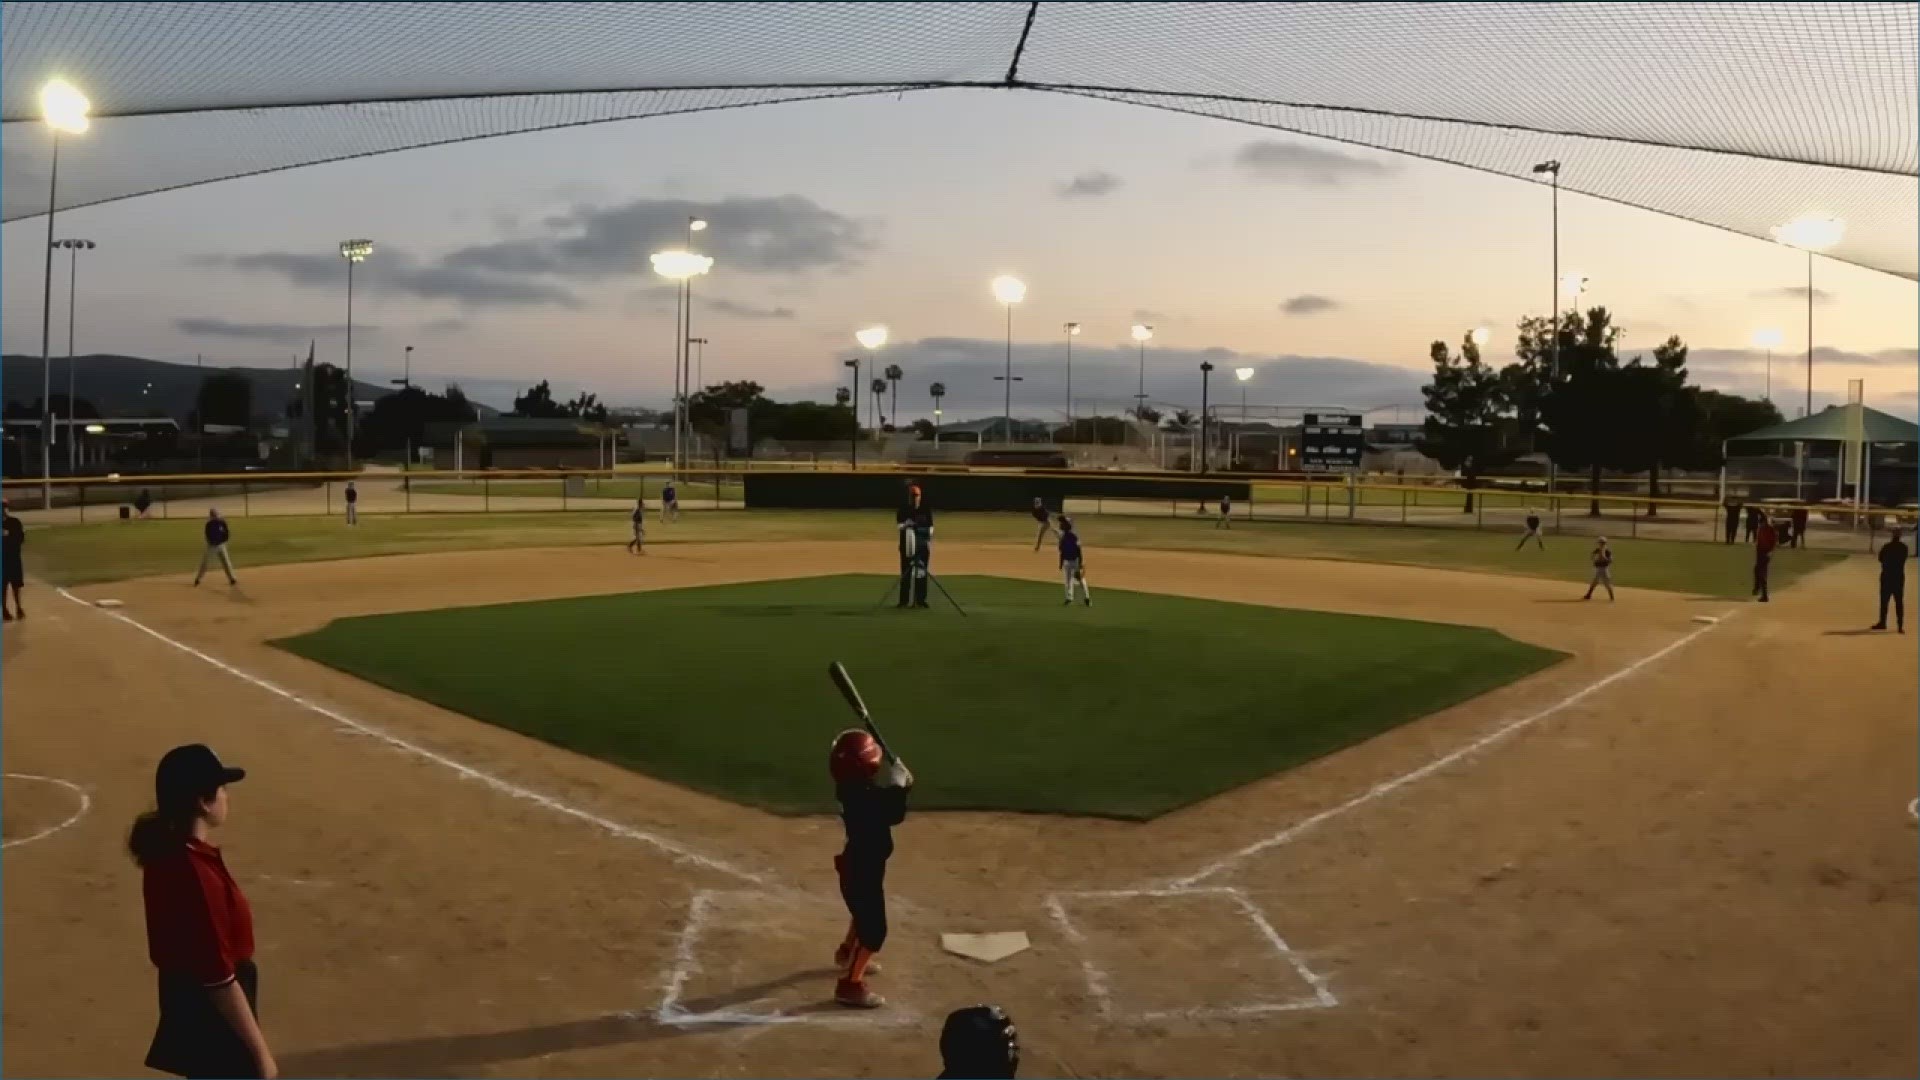 Authorities are working to determine who is responsible for shooting a gun near a youth baseball game in San Marcos.